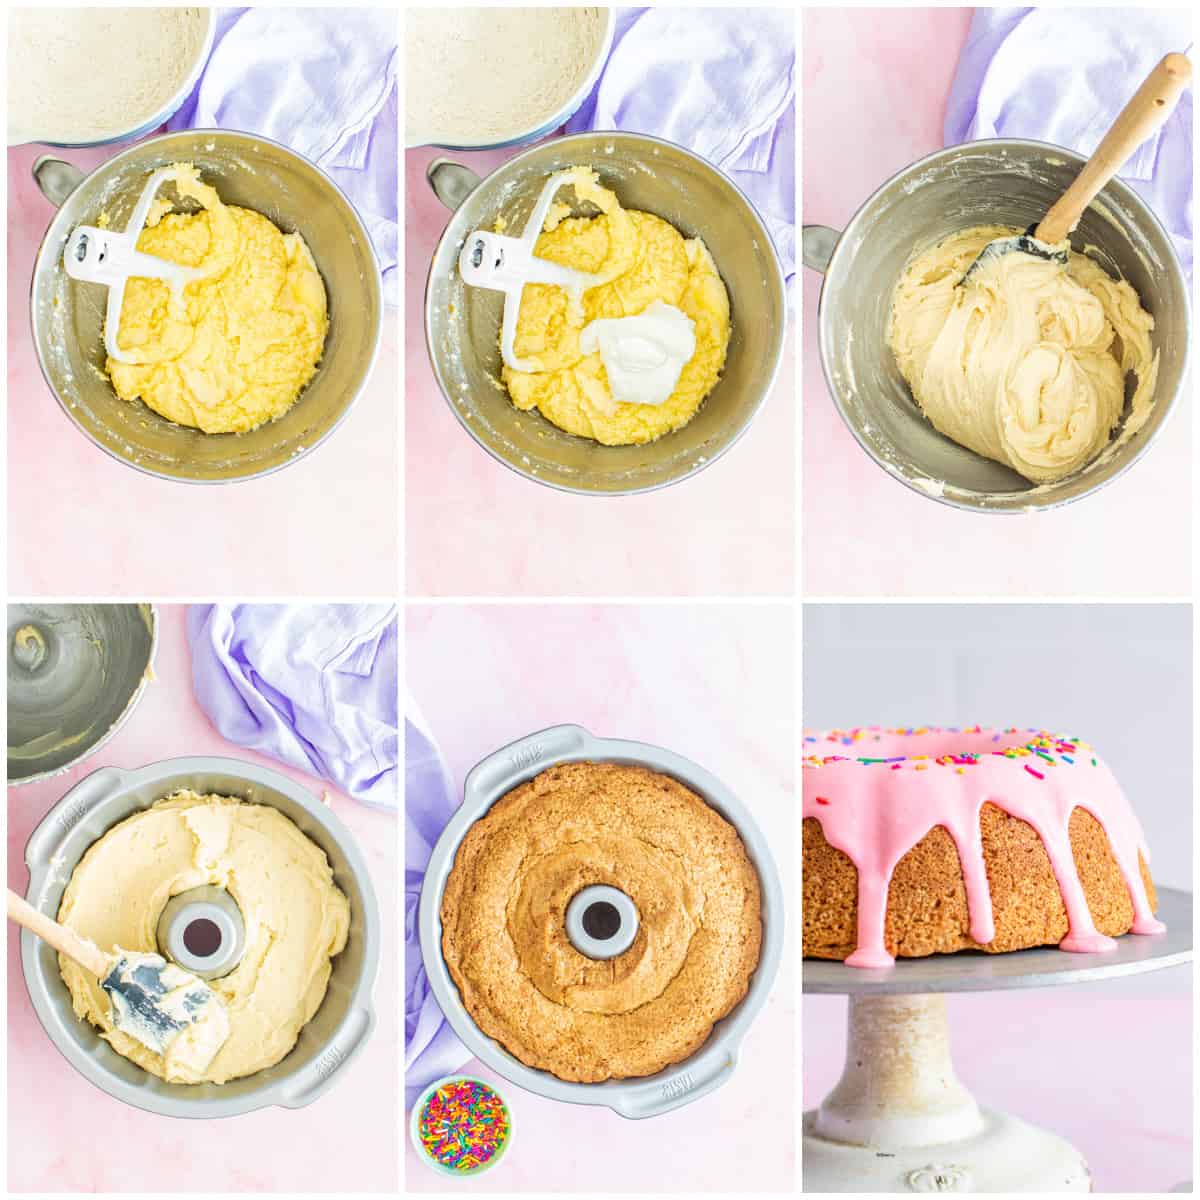 Step by step photos on how to make a Donut Cake.